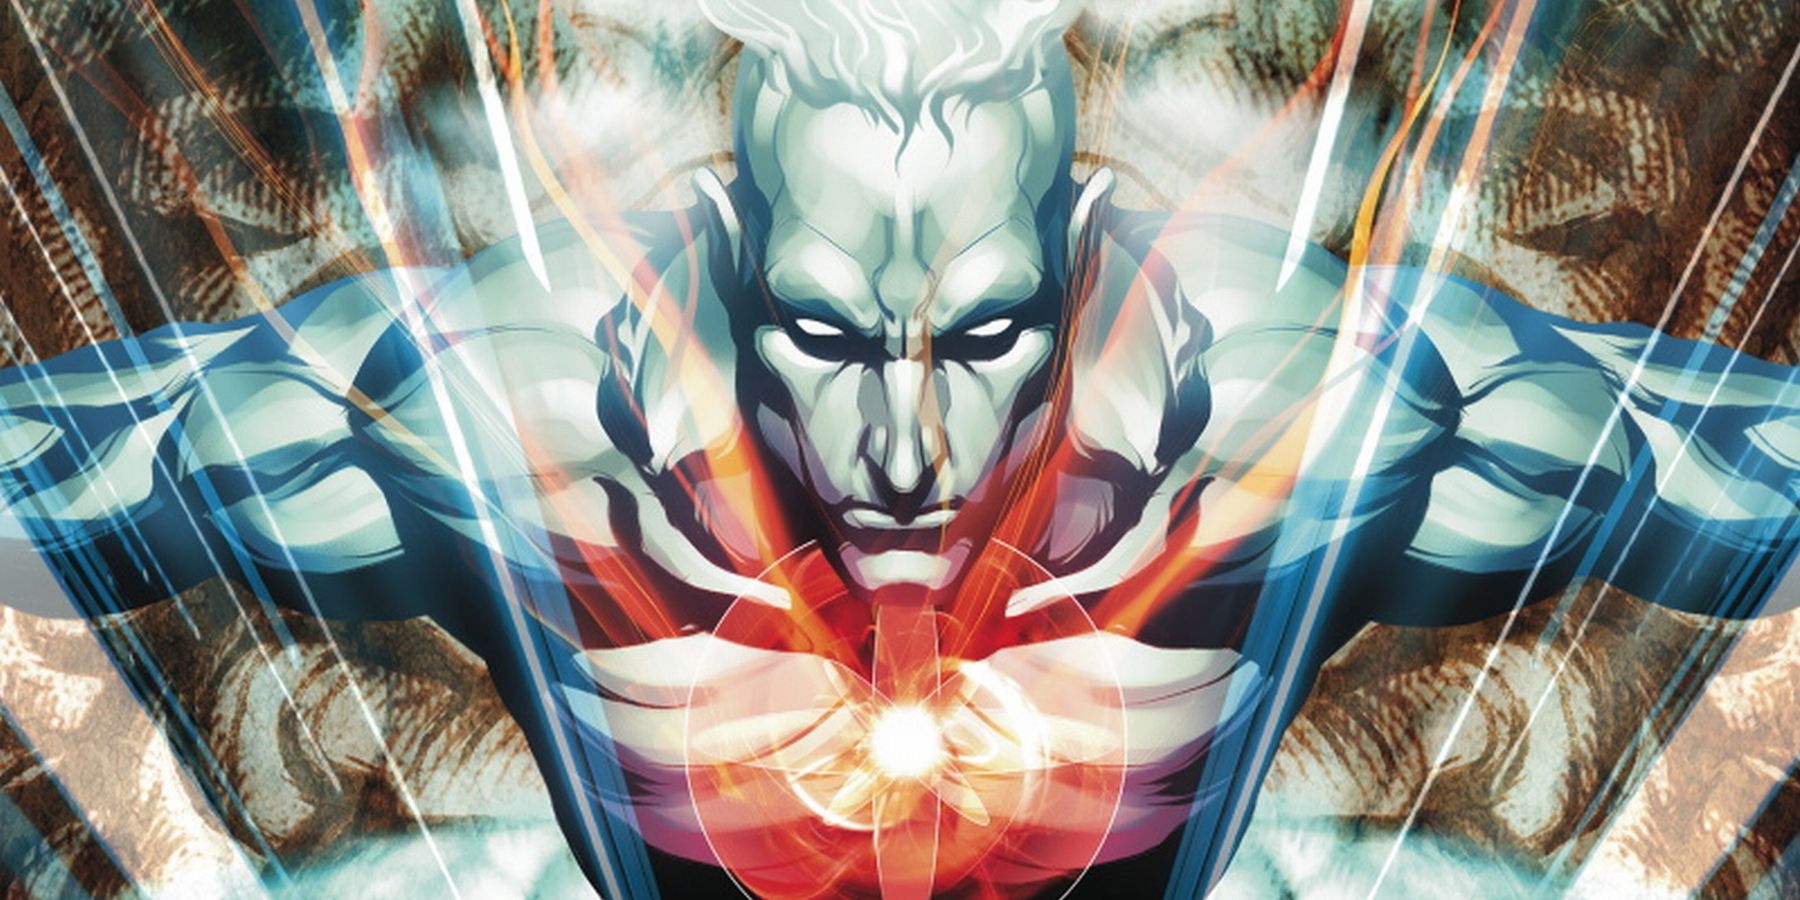 Captain Atom flying with nuclear energy